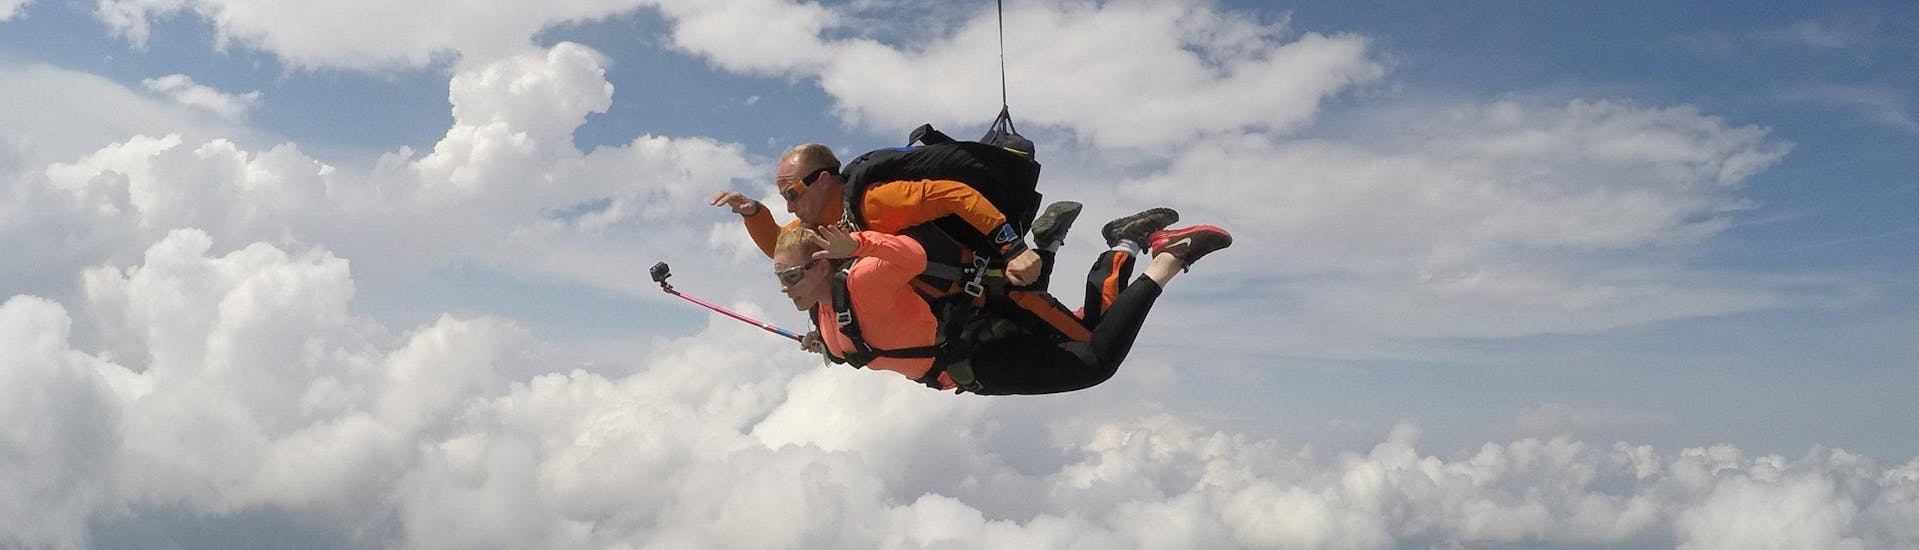 a bfc parachutisme skydiving pilot performs a Tandem Skydive at 4000m with his client in Dijon.